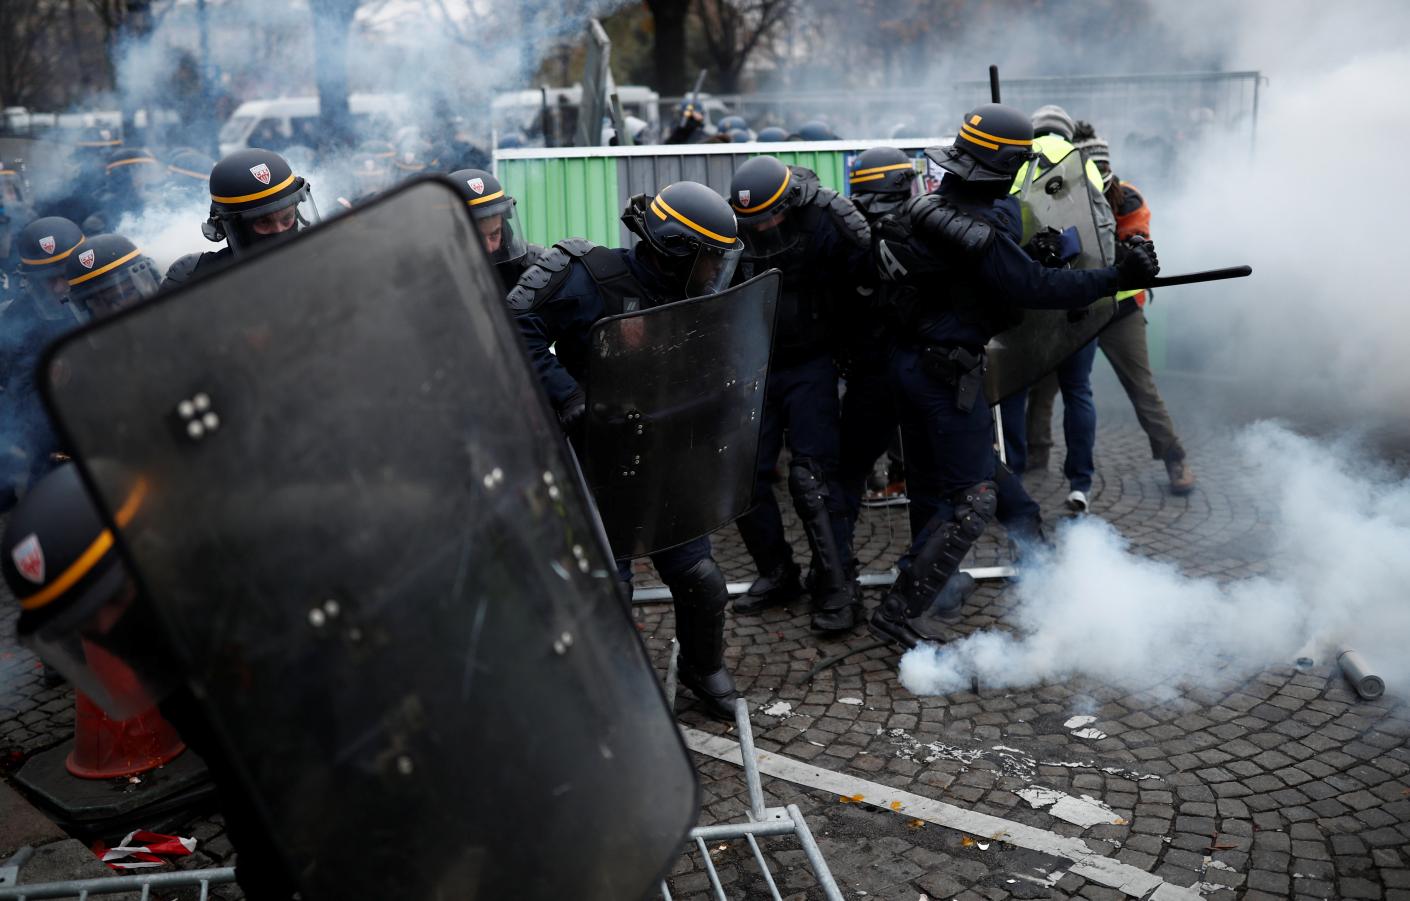 French police clash violently with protesters on Champs Elysees over petrol costs